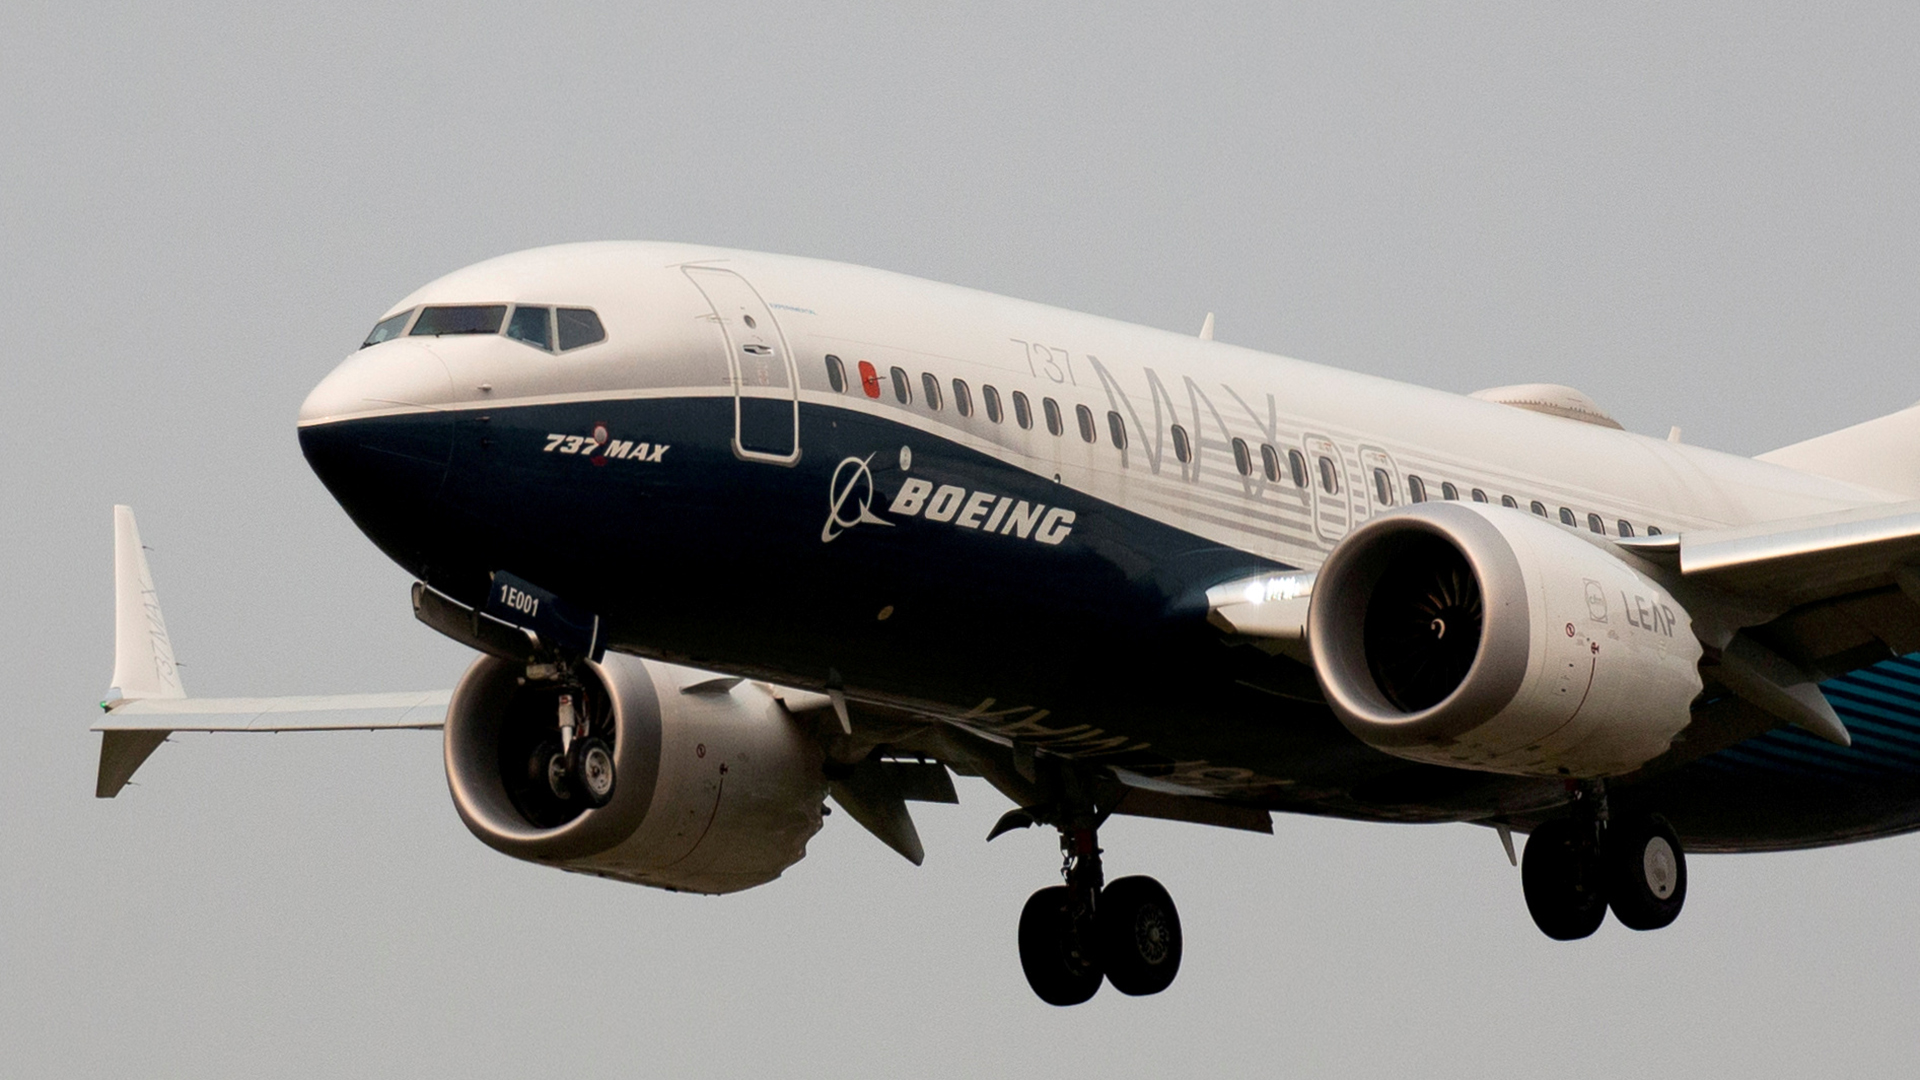 Boeing 737 Max | REUTERS